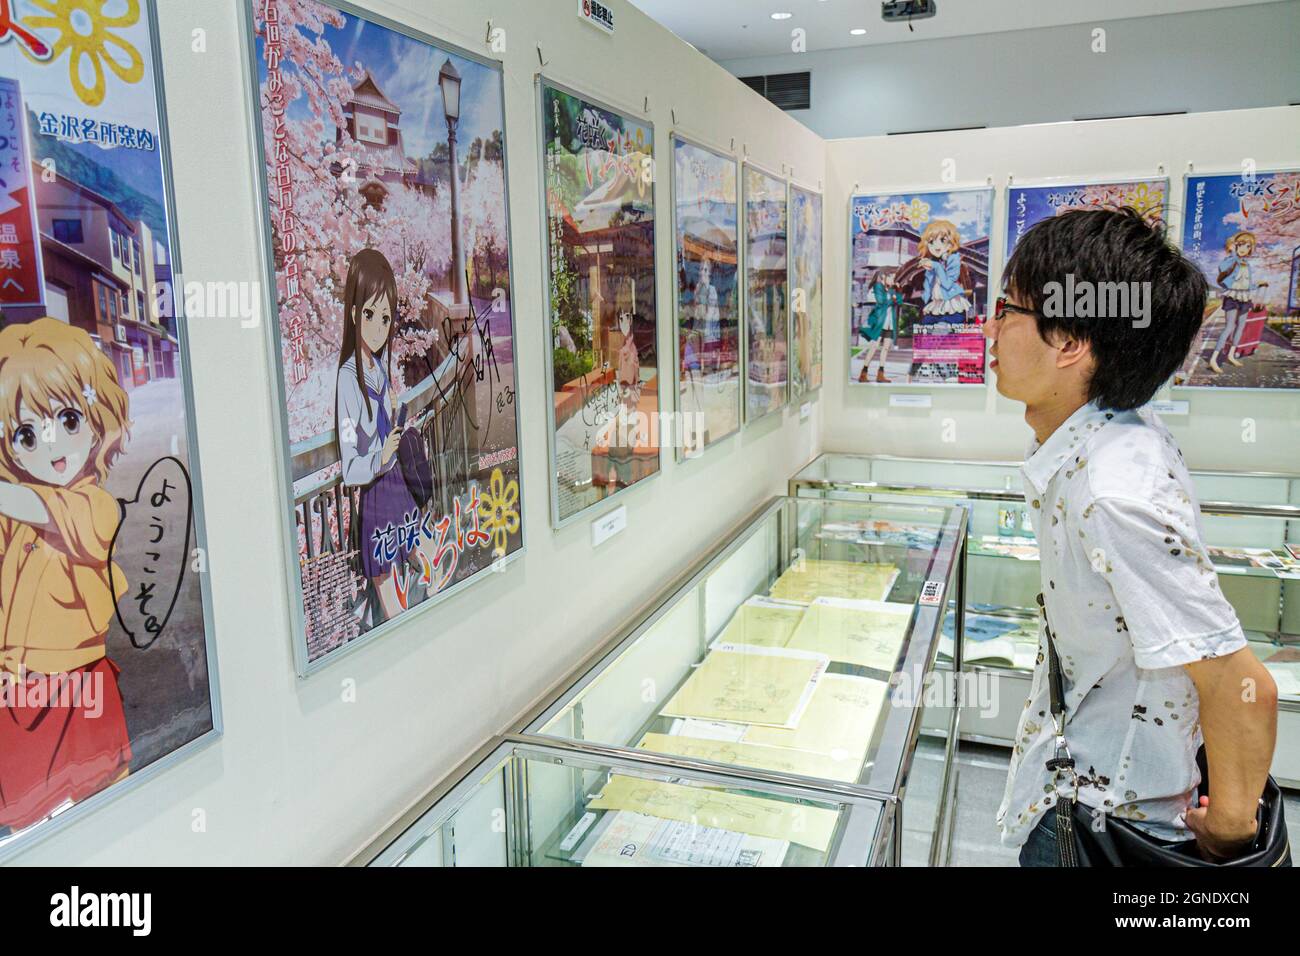 Tokyo Japan,Akihabara,Tokyo Anime Center exhibit exhibition collection,Asian boy looking movie posters movies cartoon characters Japanese Stock Photo